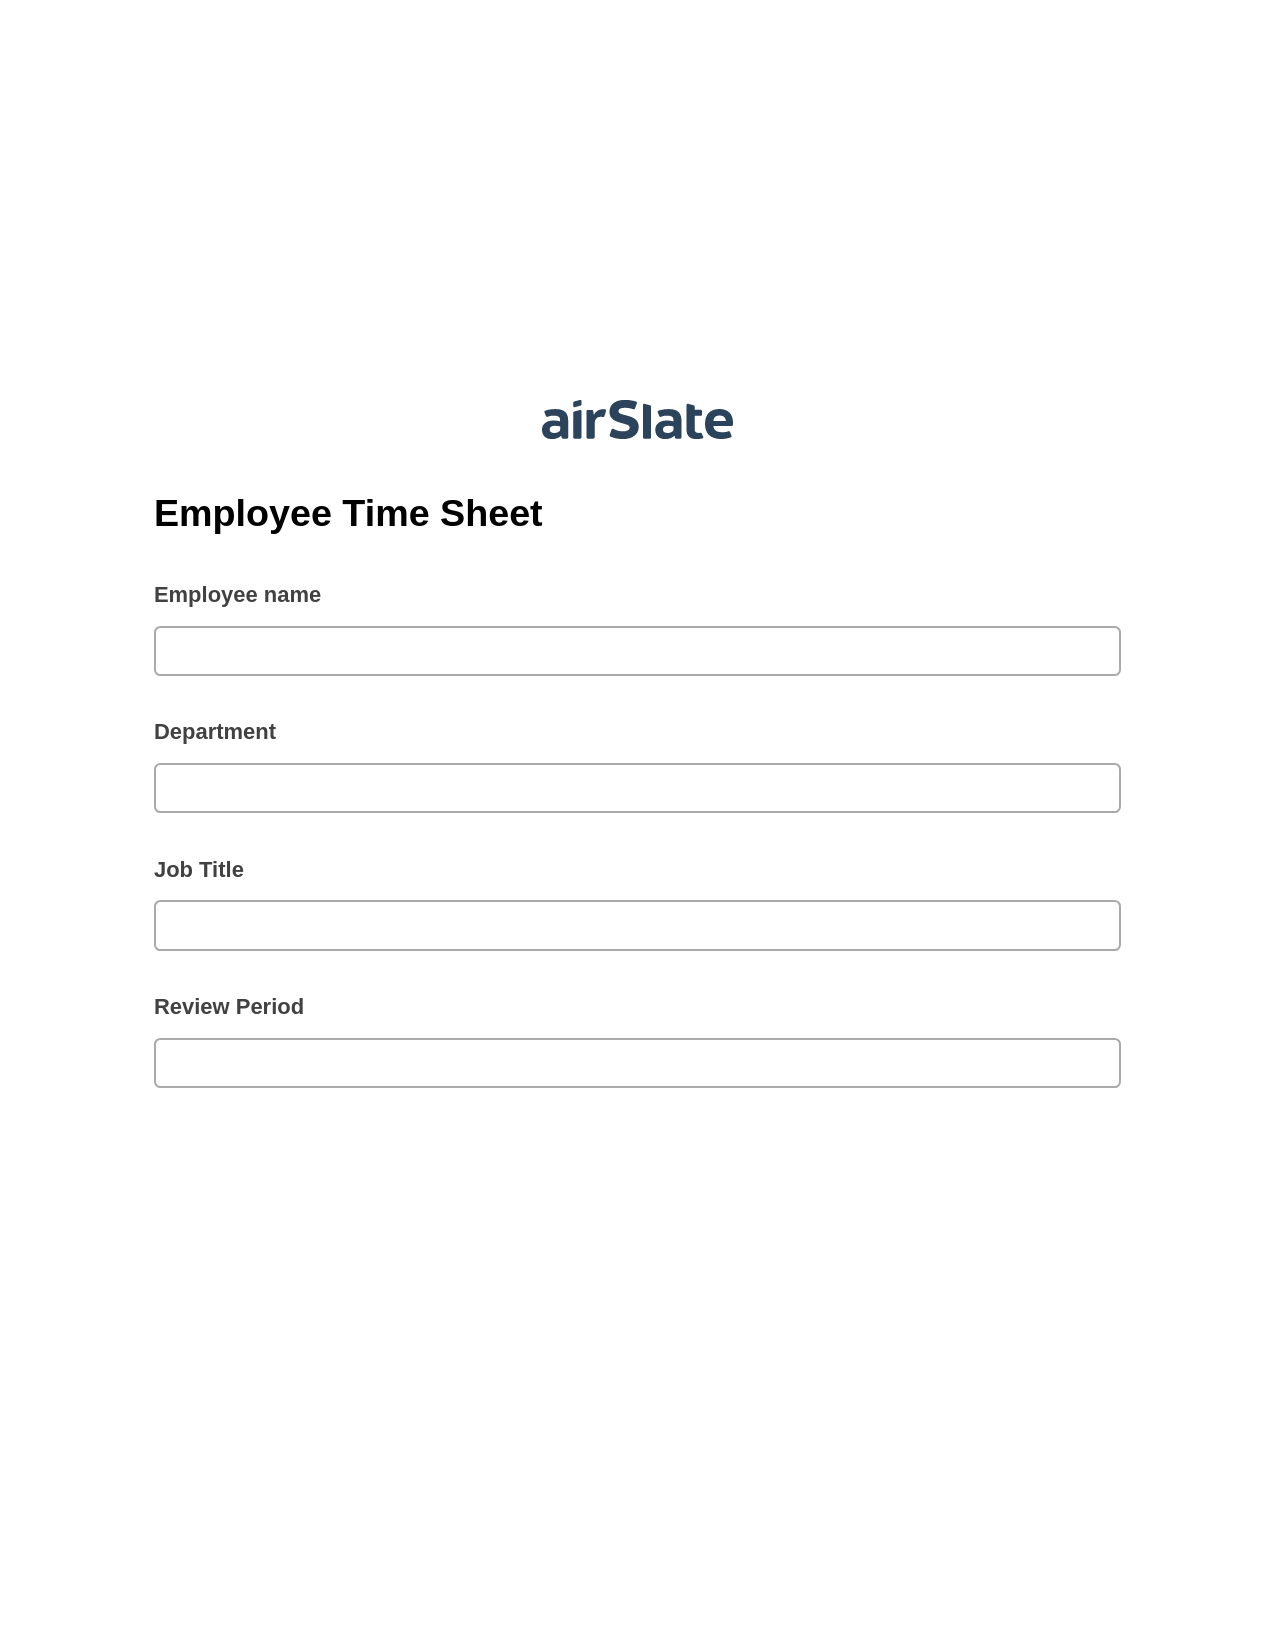 Employee Time Sheet Pre-fill from Salesforce Records Bot, Update Audit Trail Bot, Archive to Google Drive Bot